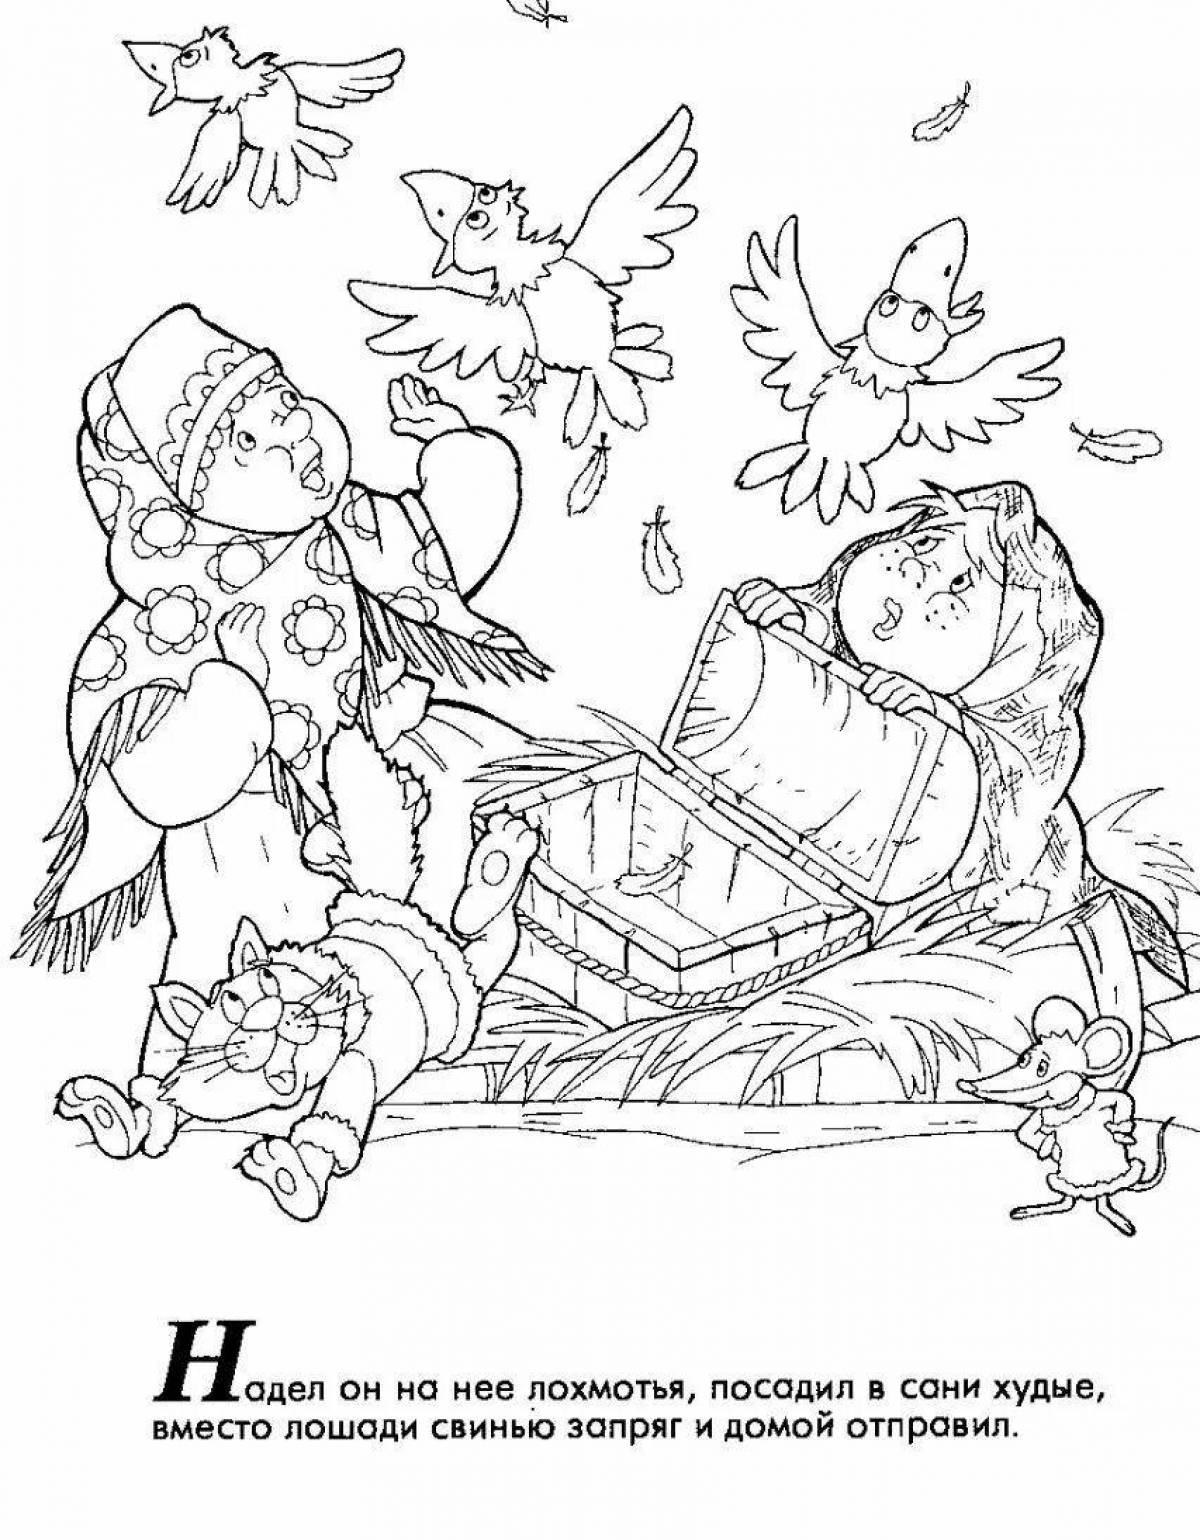 Delightful coloring book for the fairy tale frost